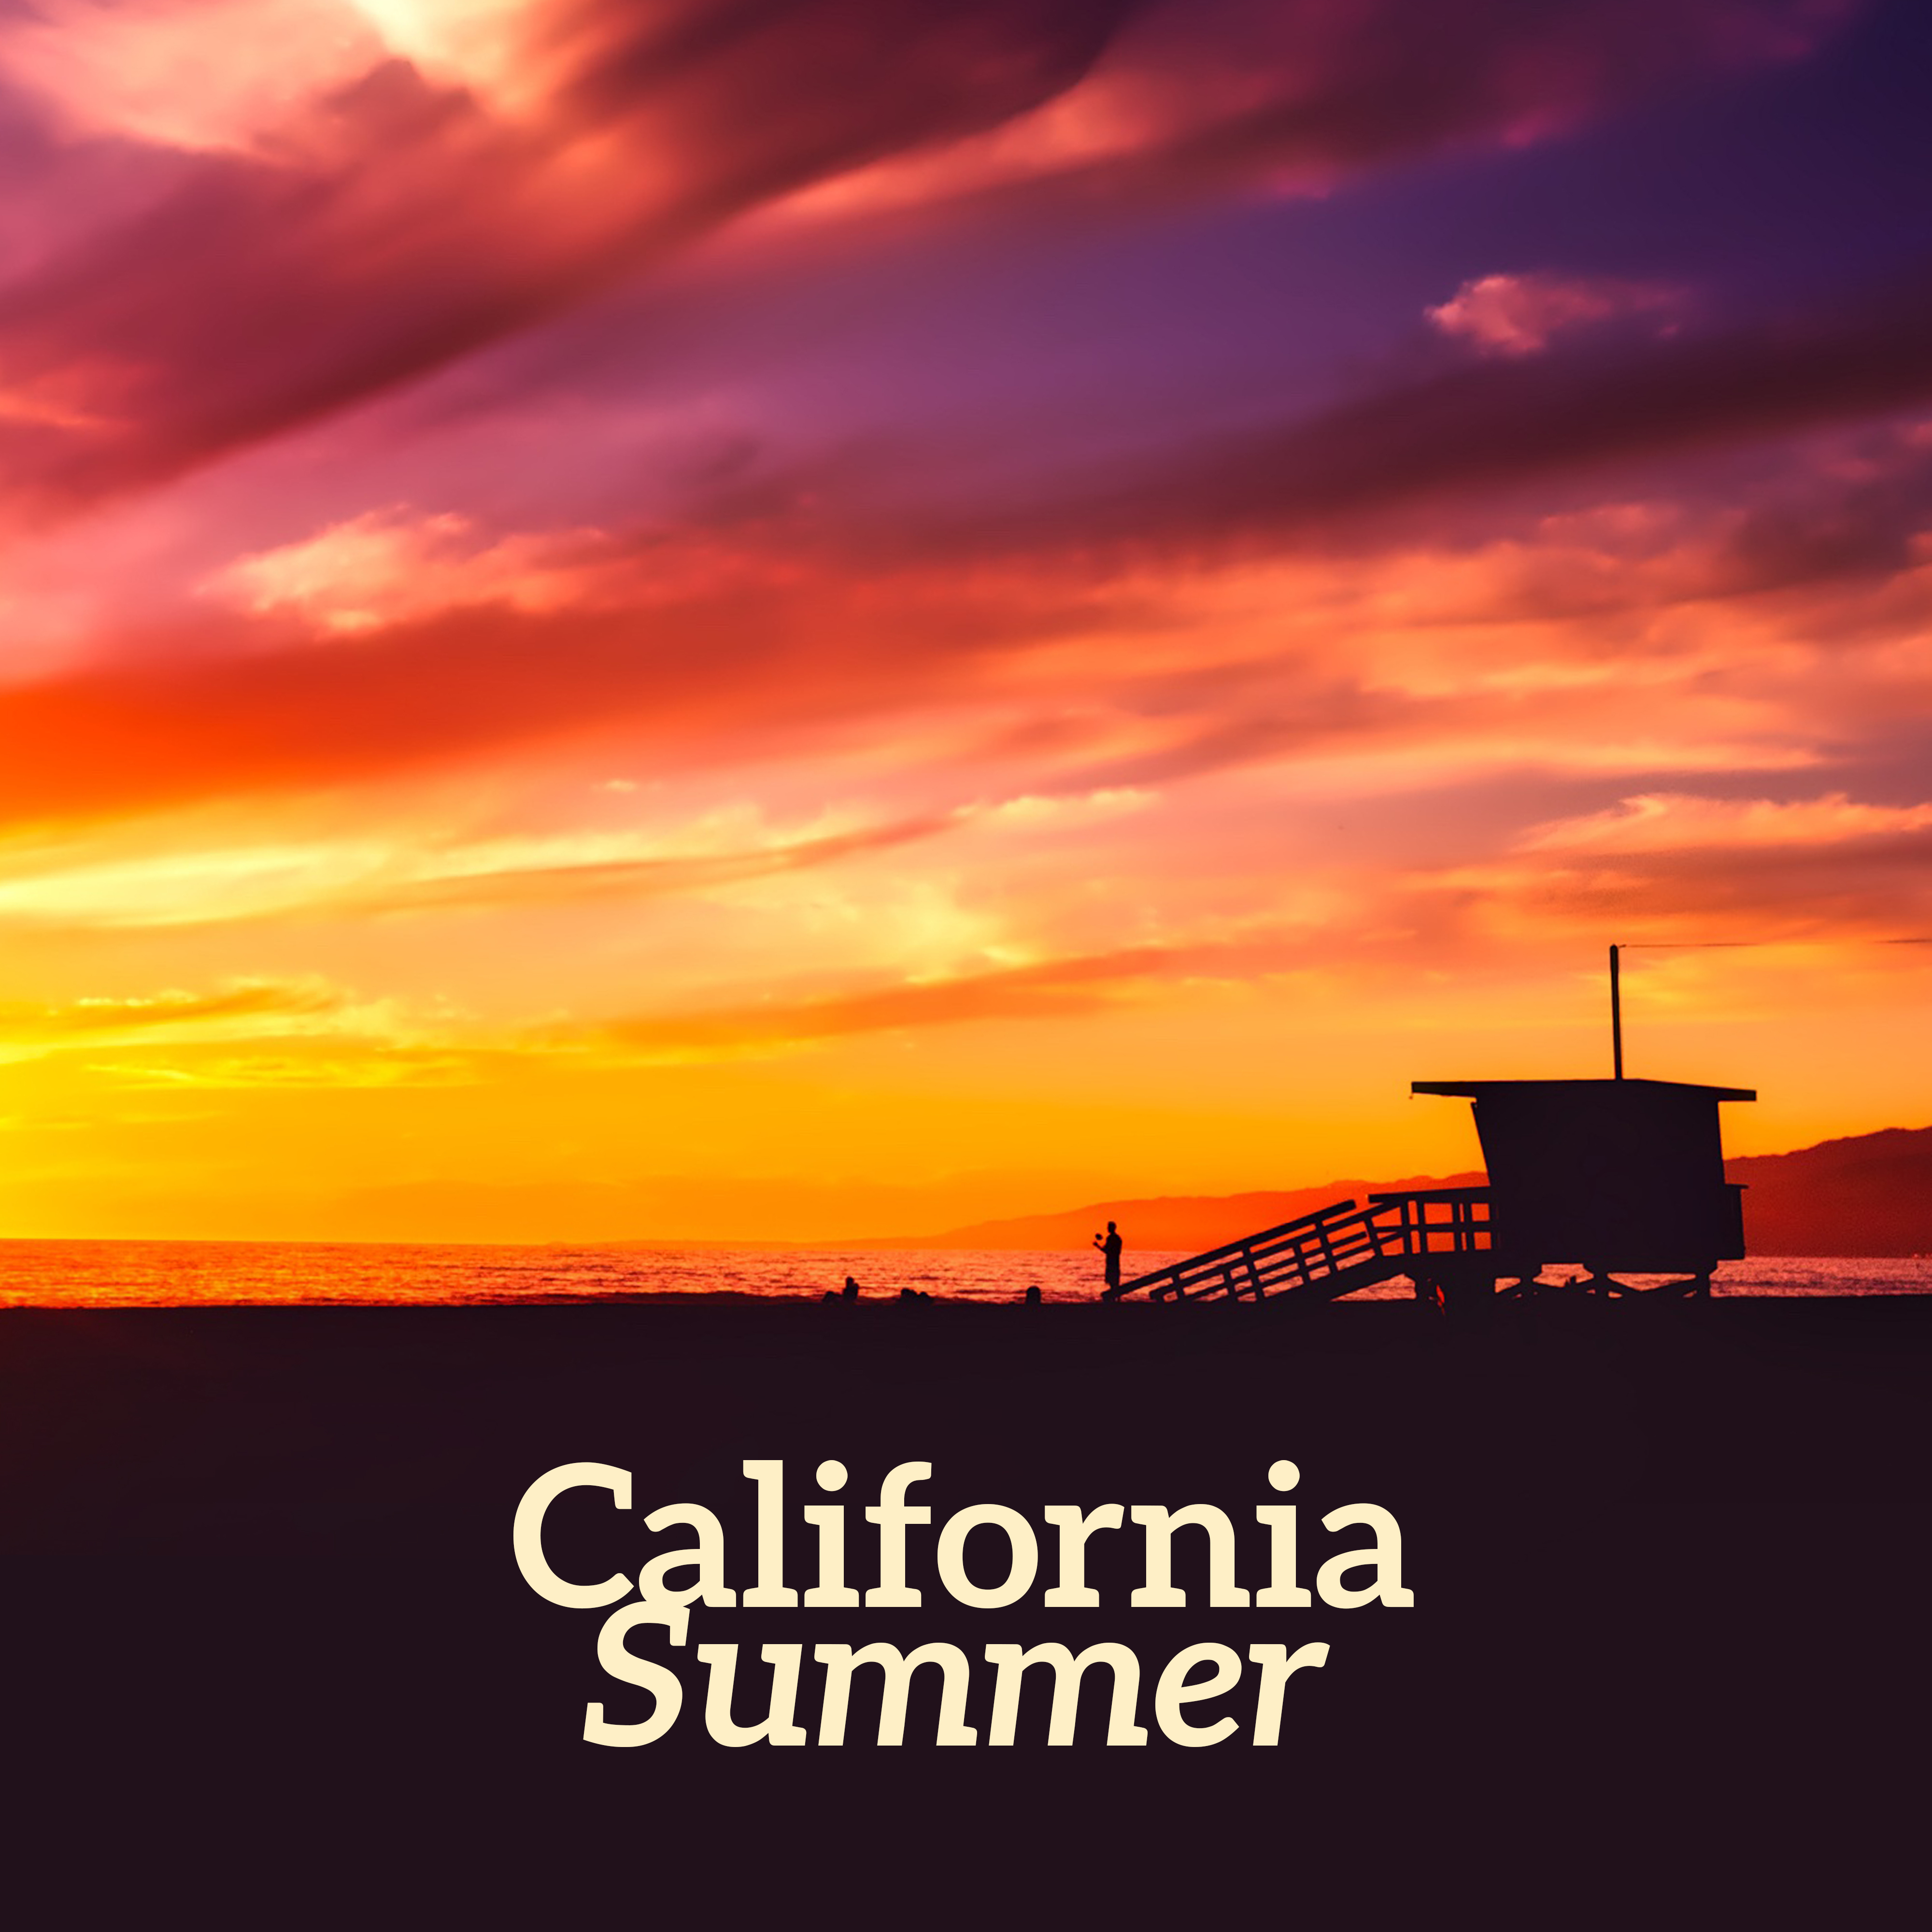 California Summer  Chillout Music, Relax, Summertime, Downbeats Tunes, Lounge